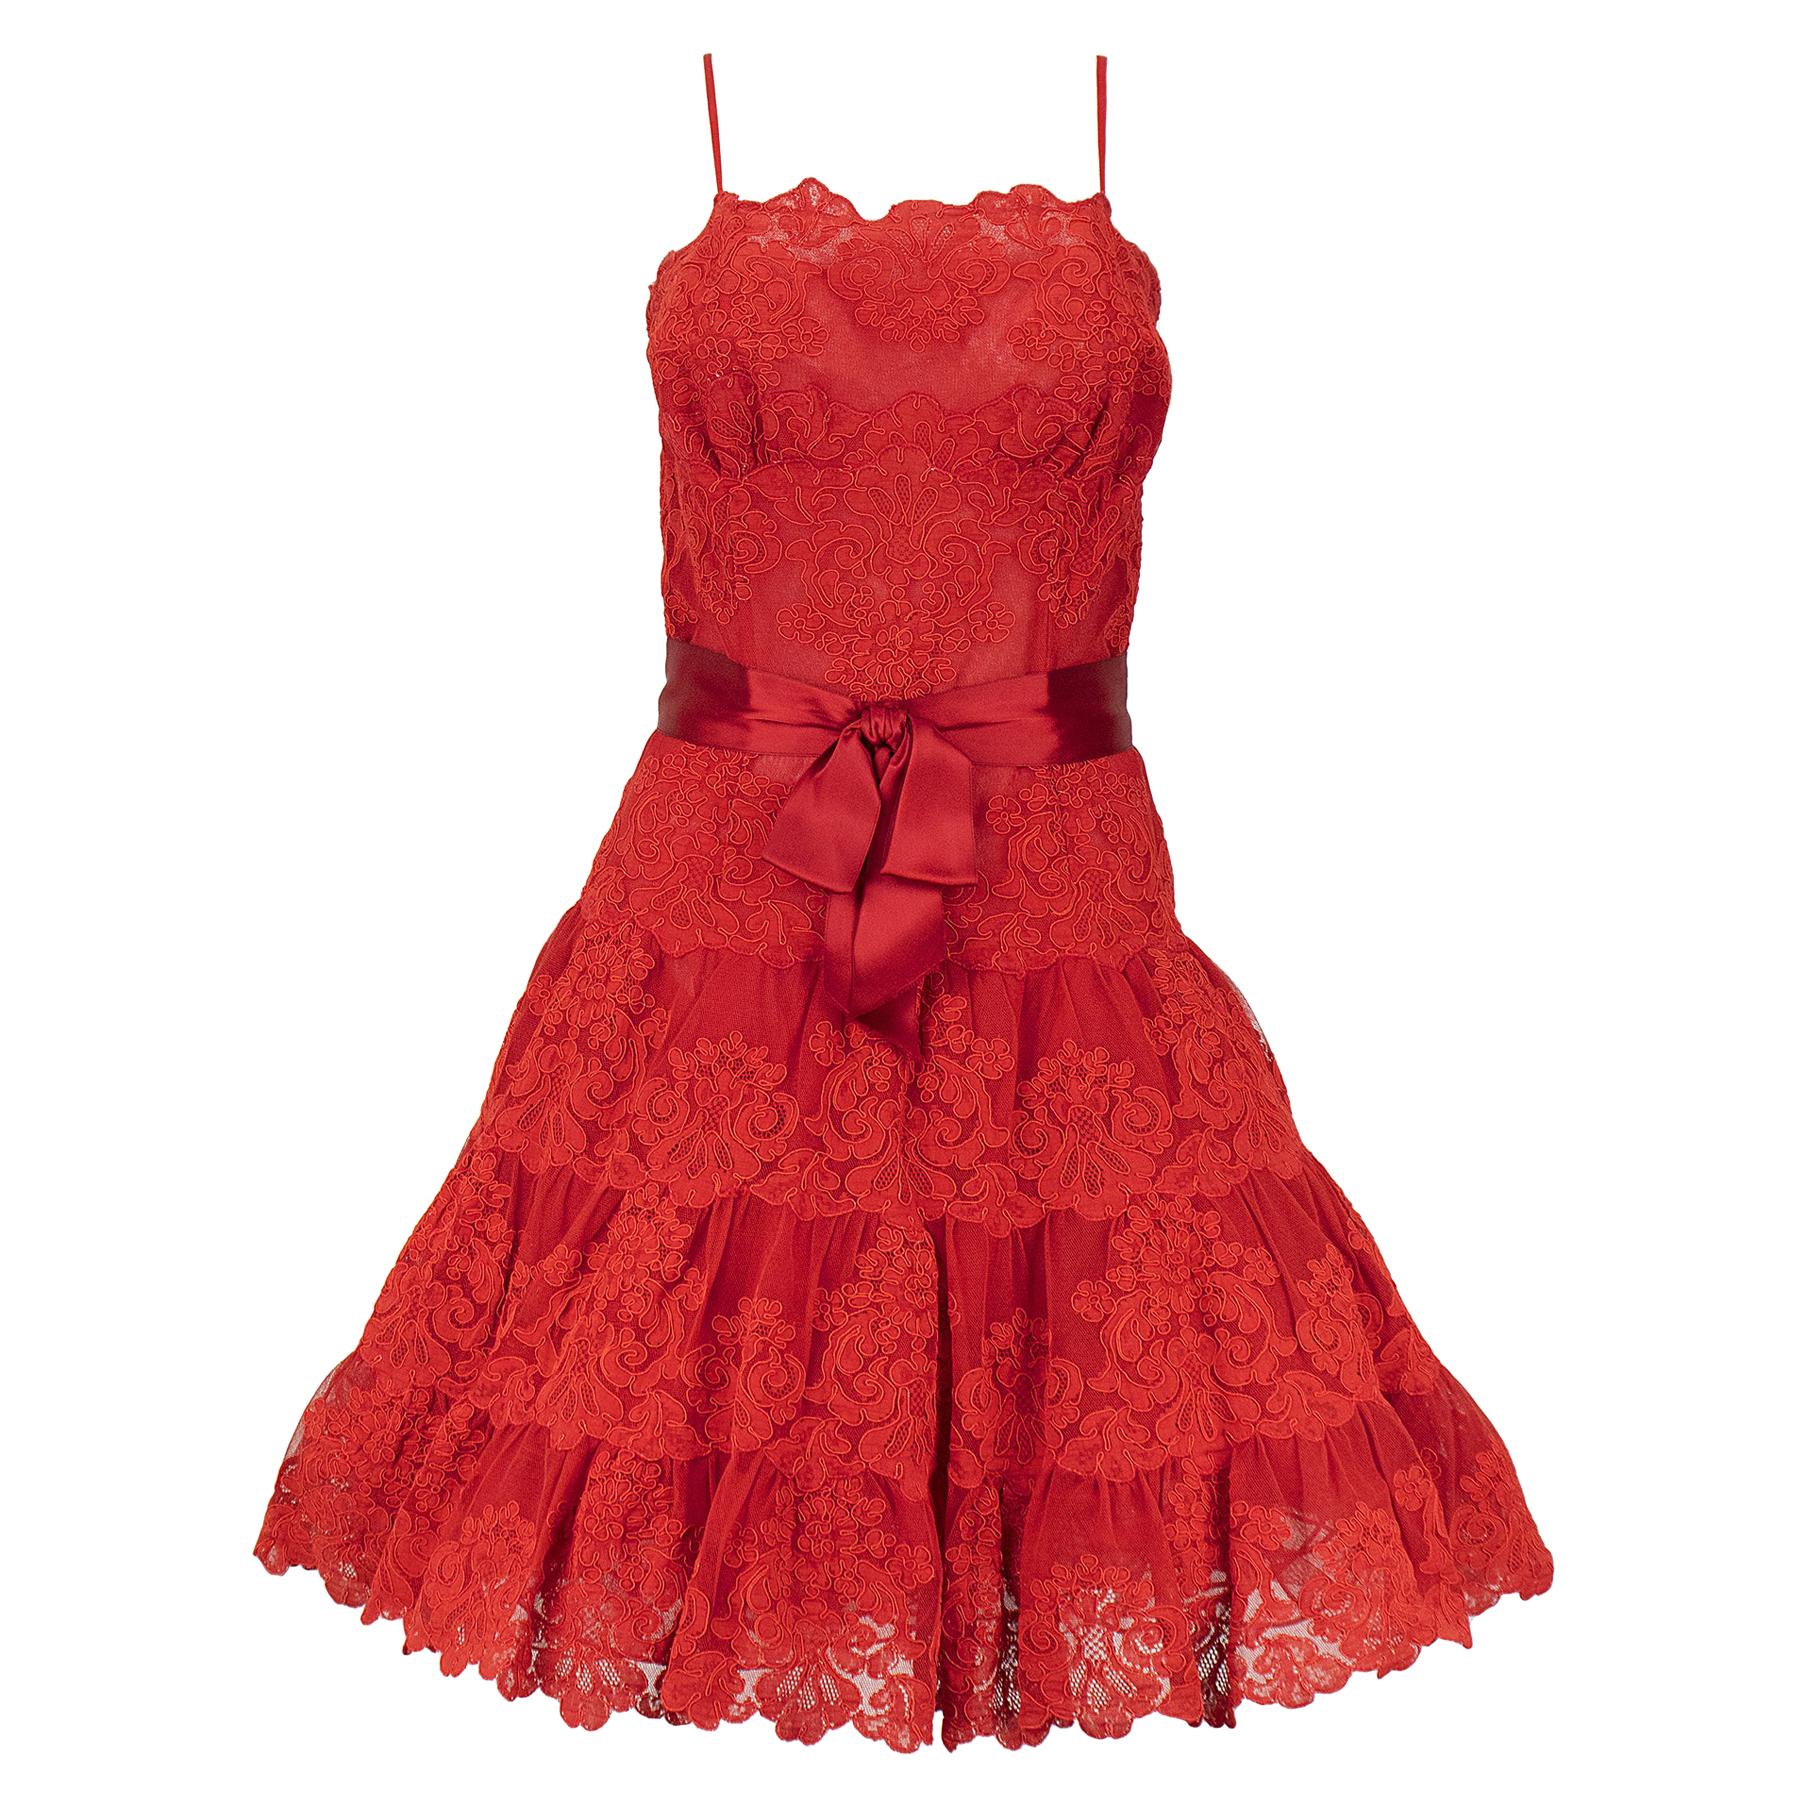  Vicky Tiel Couture Circa 1990s Red Lace Cocktail Dress For Sale